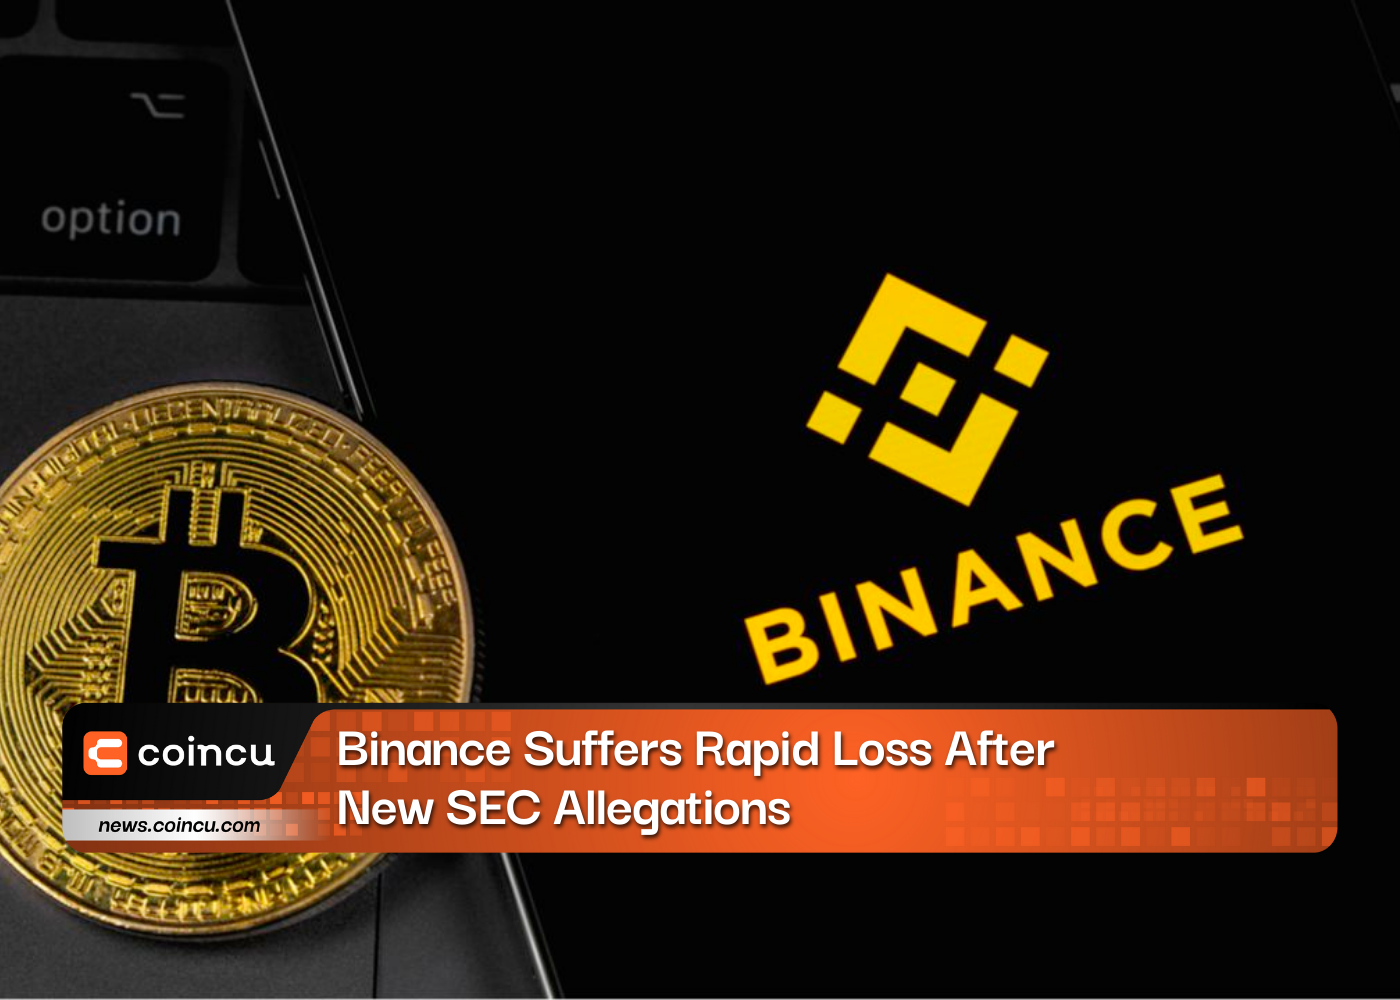 Binance Suffers Rapid Loss After New SEC Allegations